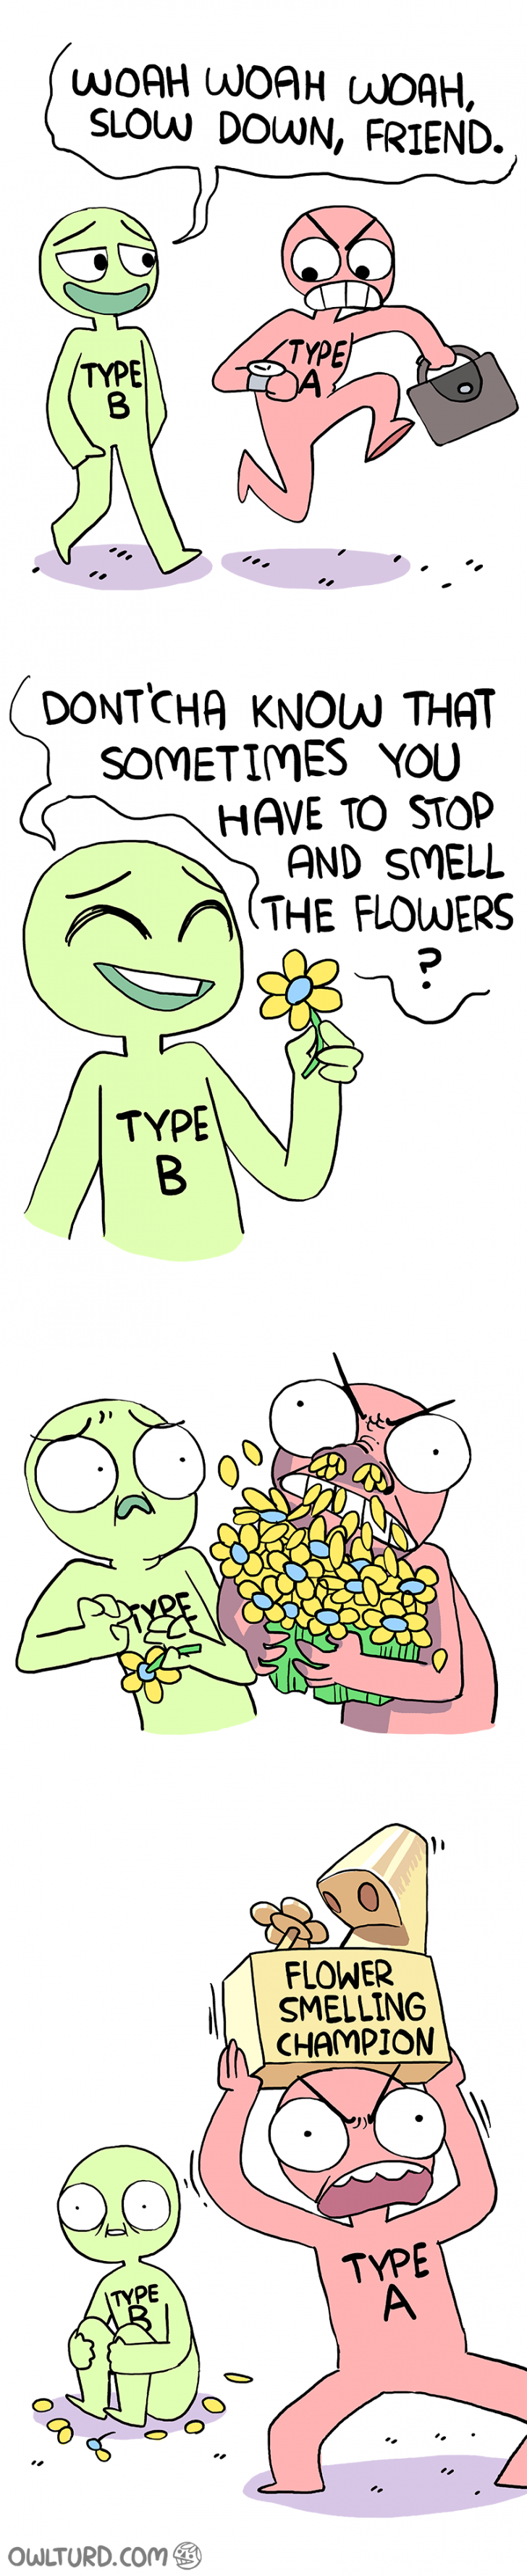 Type+A+vs+type+B+smell+the+flowers